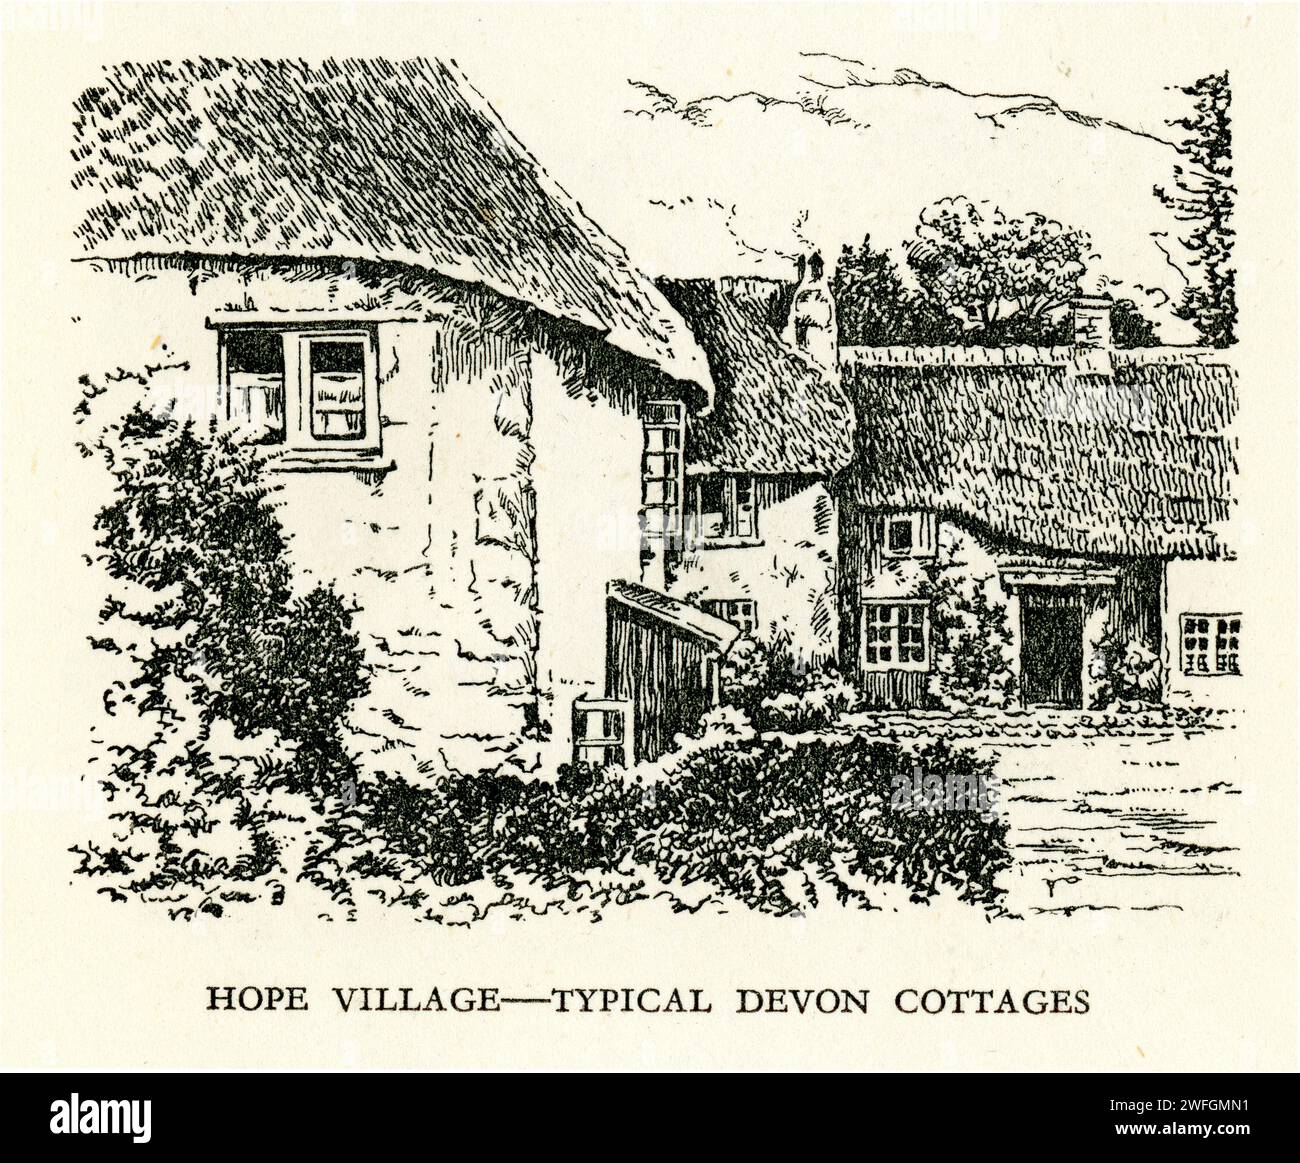 Pen and ink sketch - Hope village - typical Devon cottages.  From the book Glorious Devon.  by S.P.B. Mais, published by London Great Western Railway Company, 1928 Stock Photo